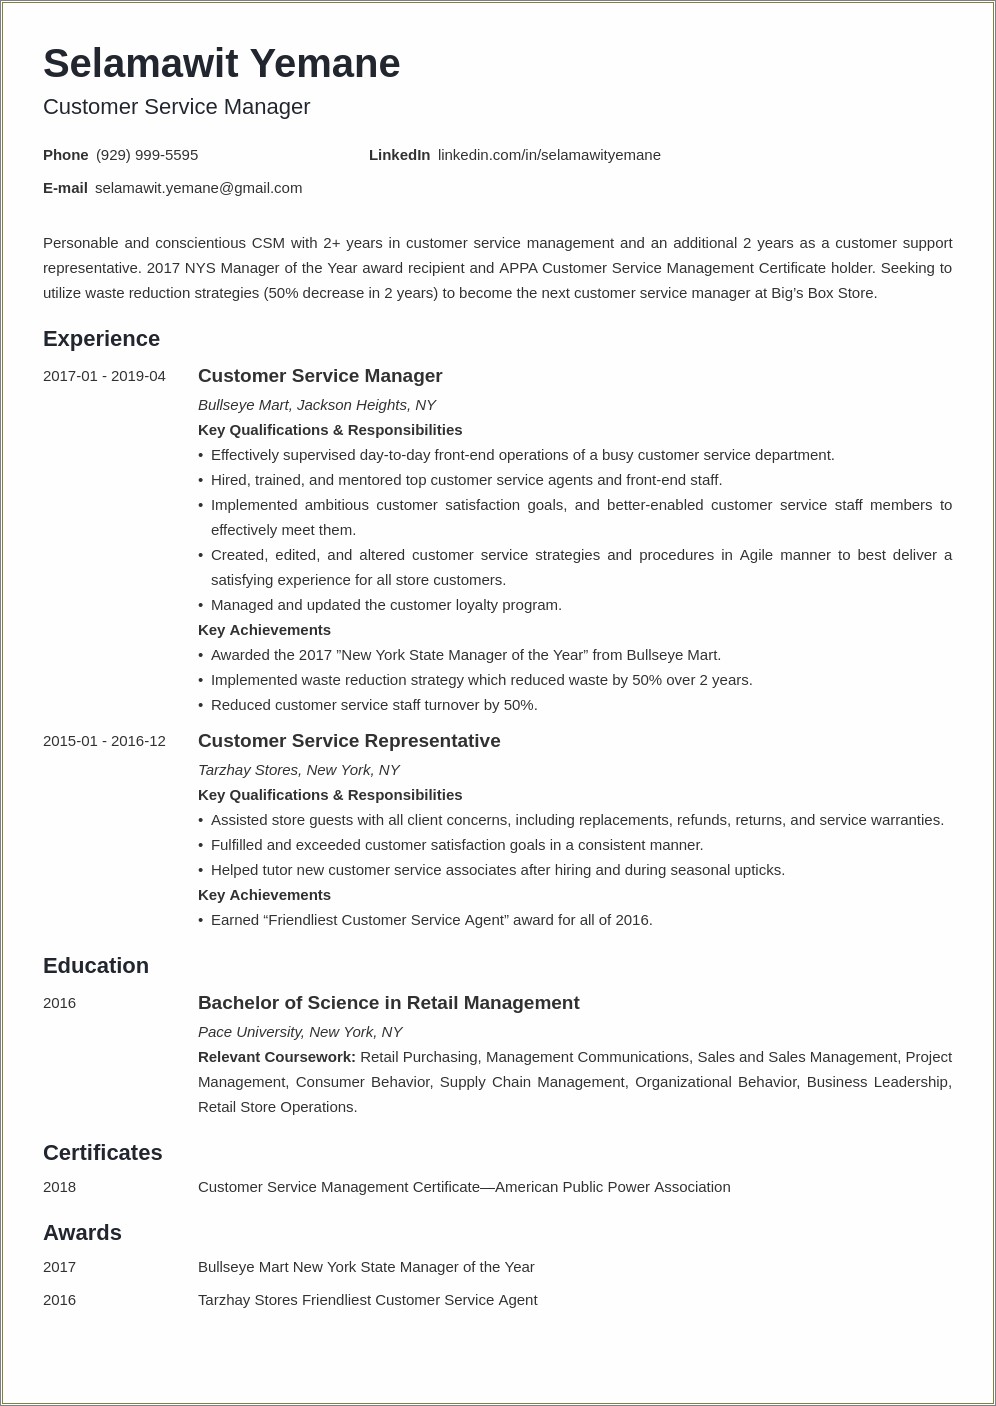 Resume Professional Summary Examples For Customer Service